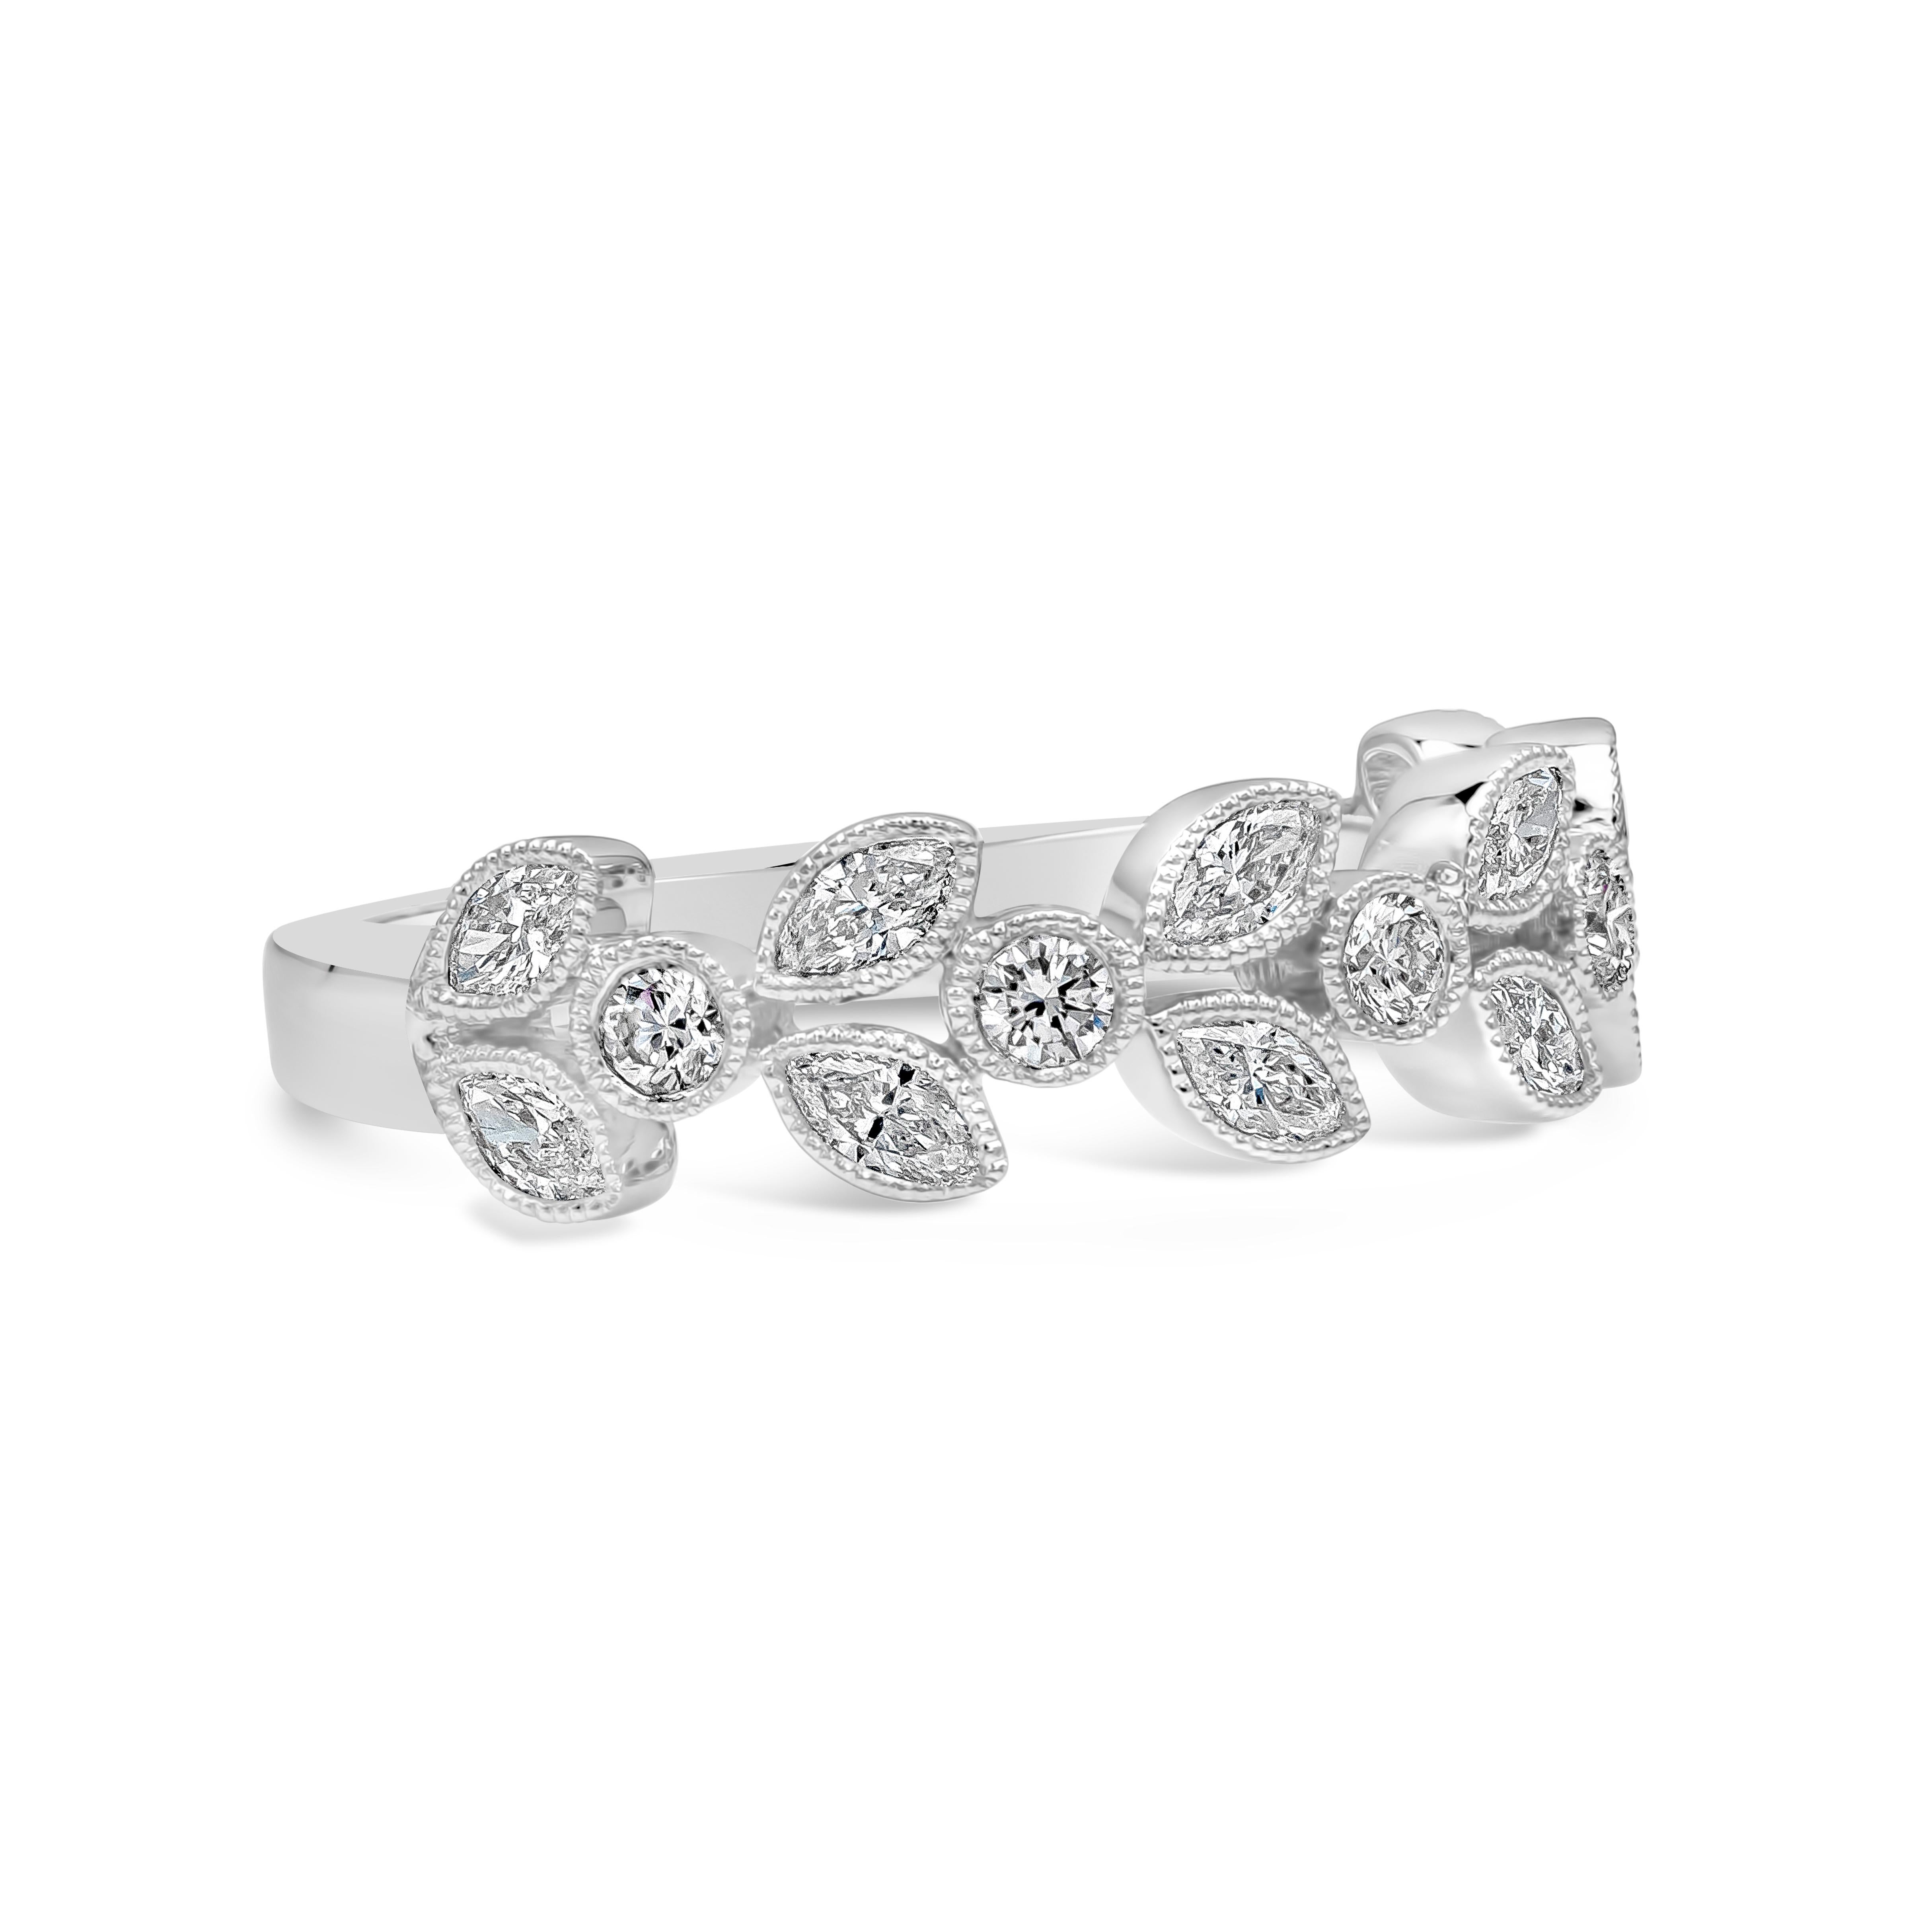 A fashionable ring showcasing a cluster of round and marquise cut diamonds, bezel set in a leaf design with beaded edges. Diamonds weigh 0.71 carats total, F-G Color and Vs in Clarity. Made in 18K White Gold. Size 6.5 US resizable upon